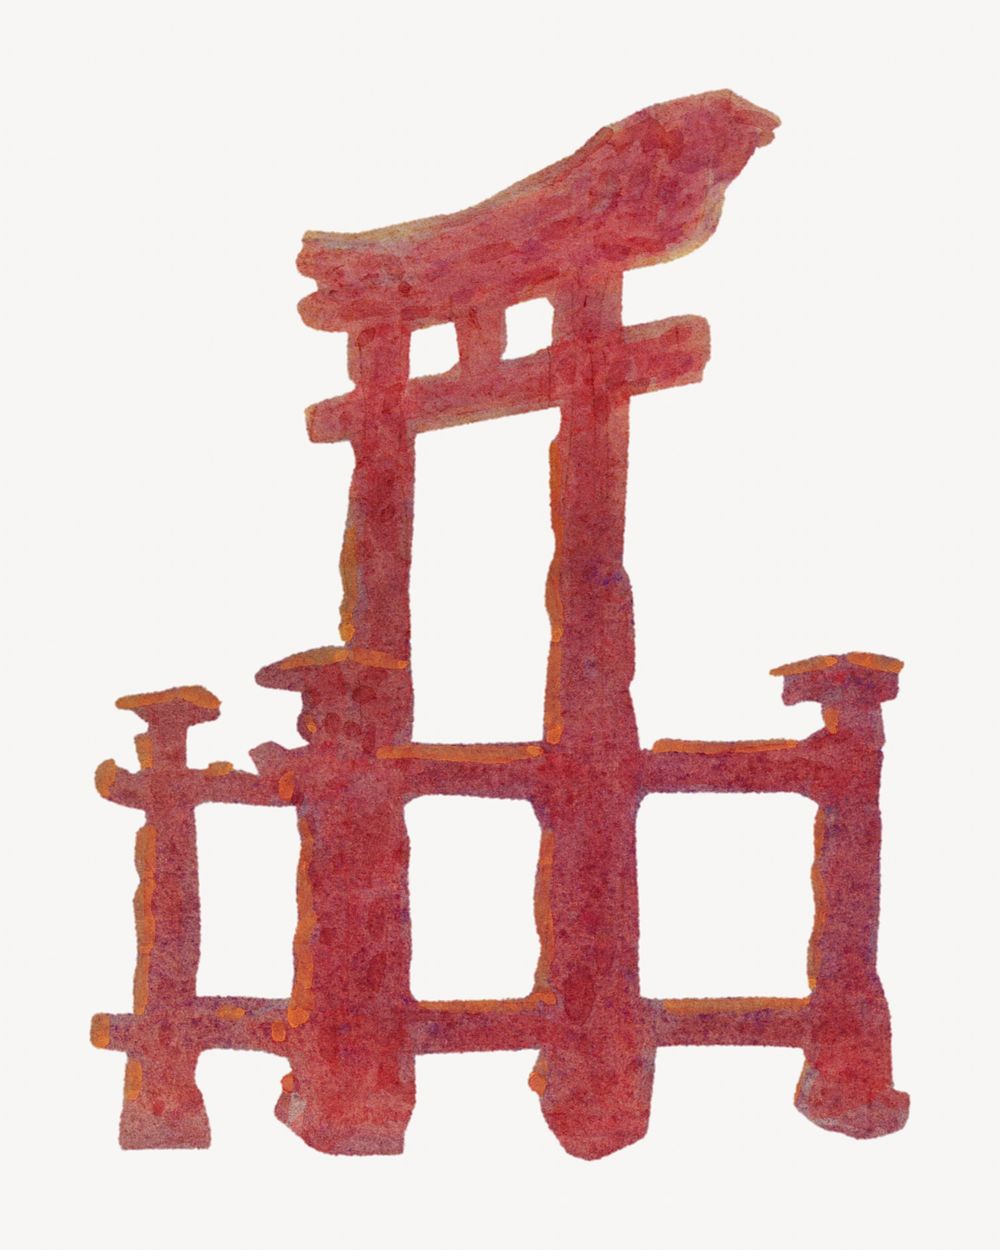 Japanese Torii gate, vintage illustration by Yoshihiko Ito. Remixed by rawpixel.